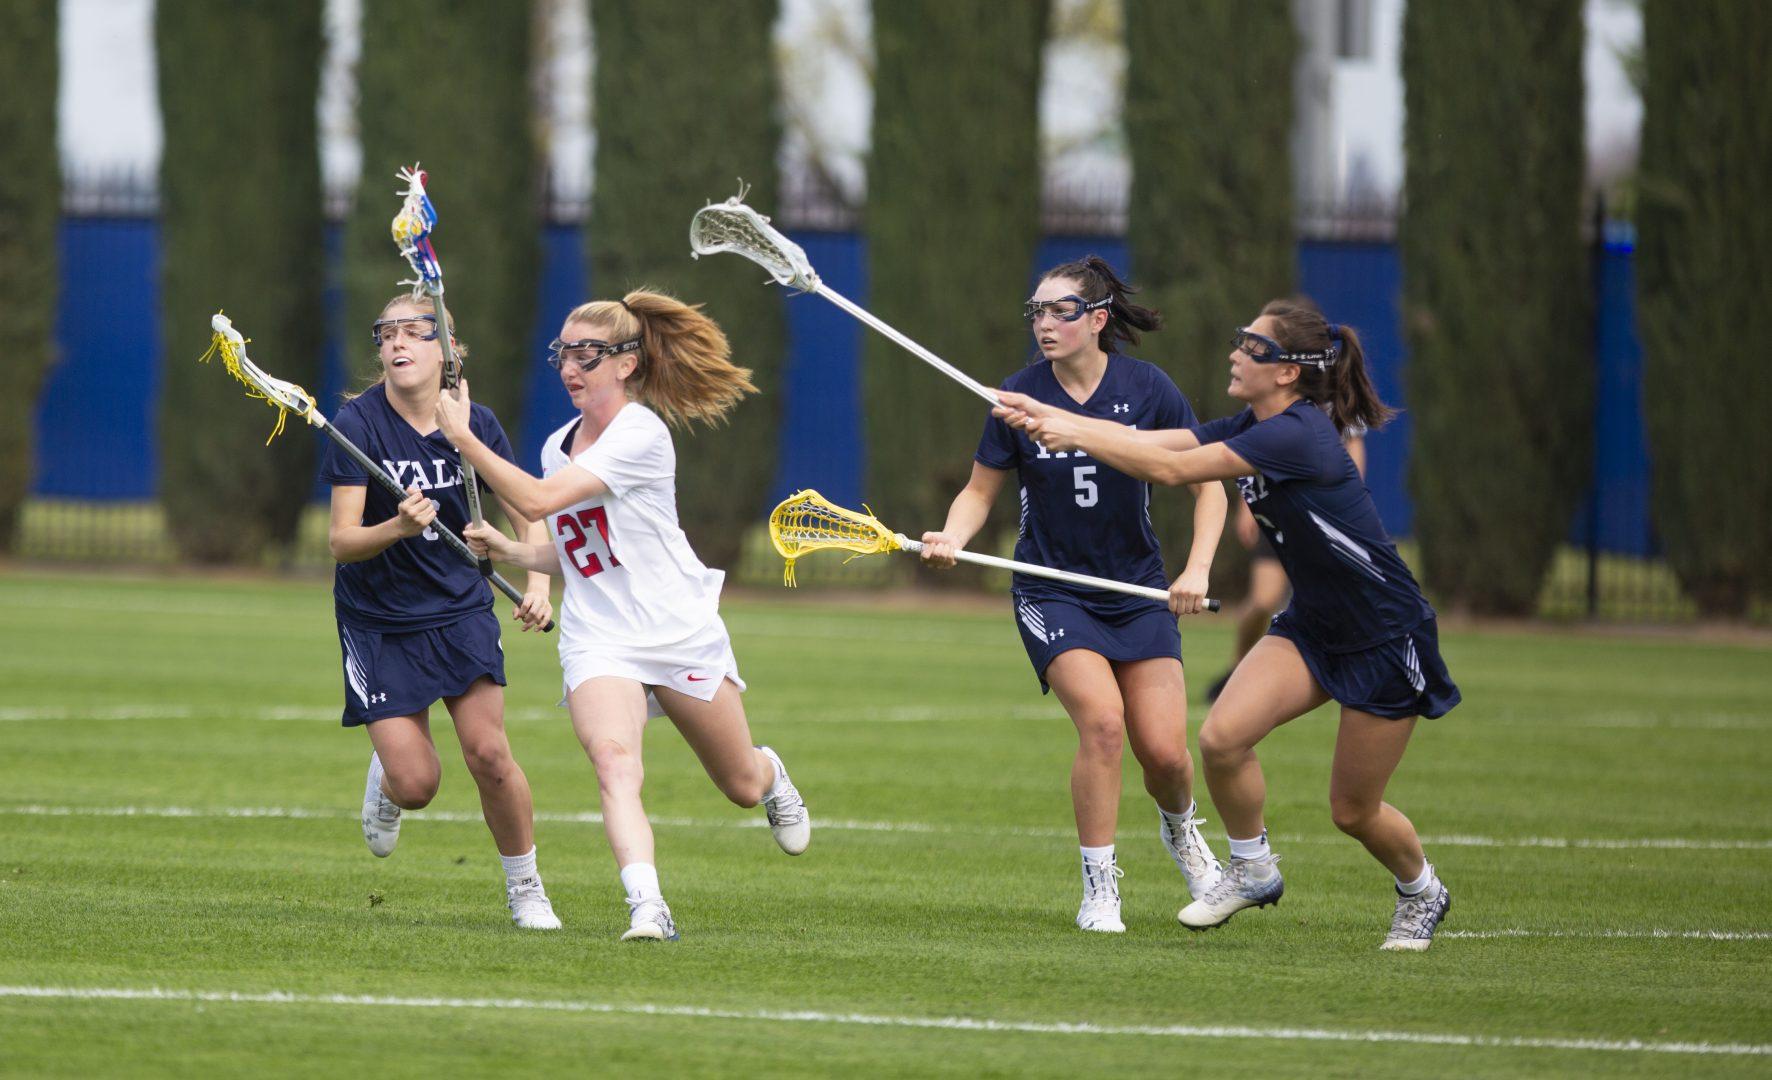 Hennessey Evans passes the ball in a lacrosse match against Yale on Thursday, March 12, 2020. Fresno State athletics announced the cancellation of all spring sporting events indefinitely earlier Thursday. (Larry Valenzuela/The Collegian)